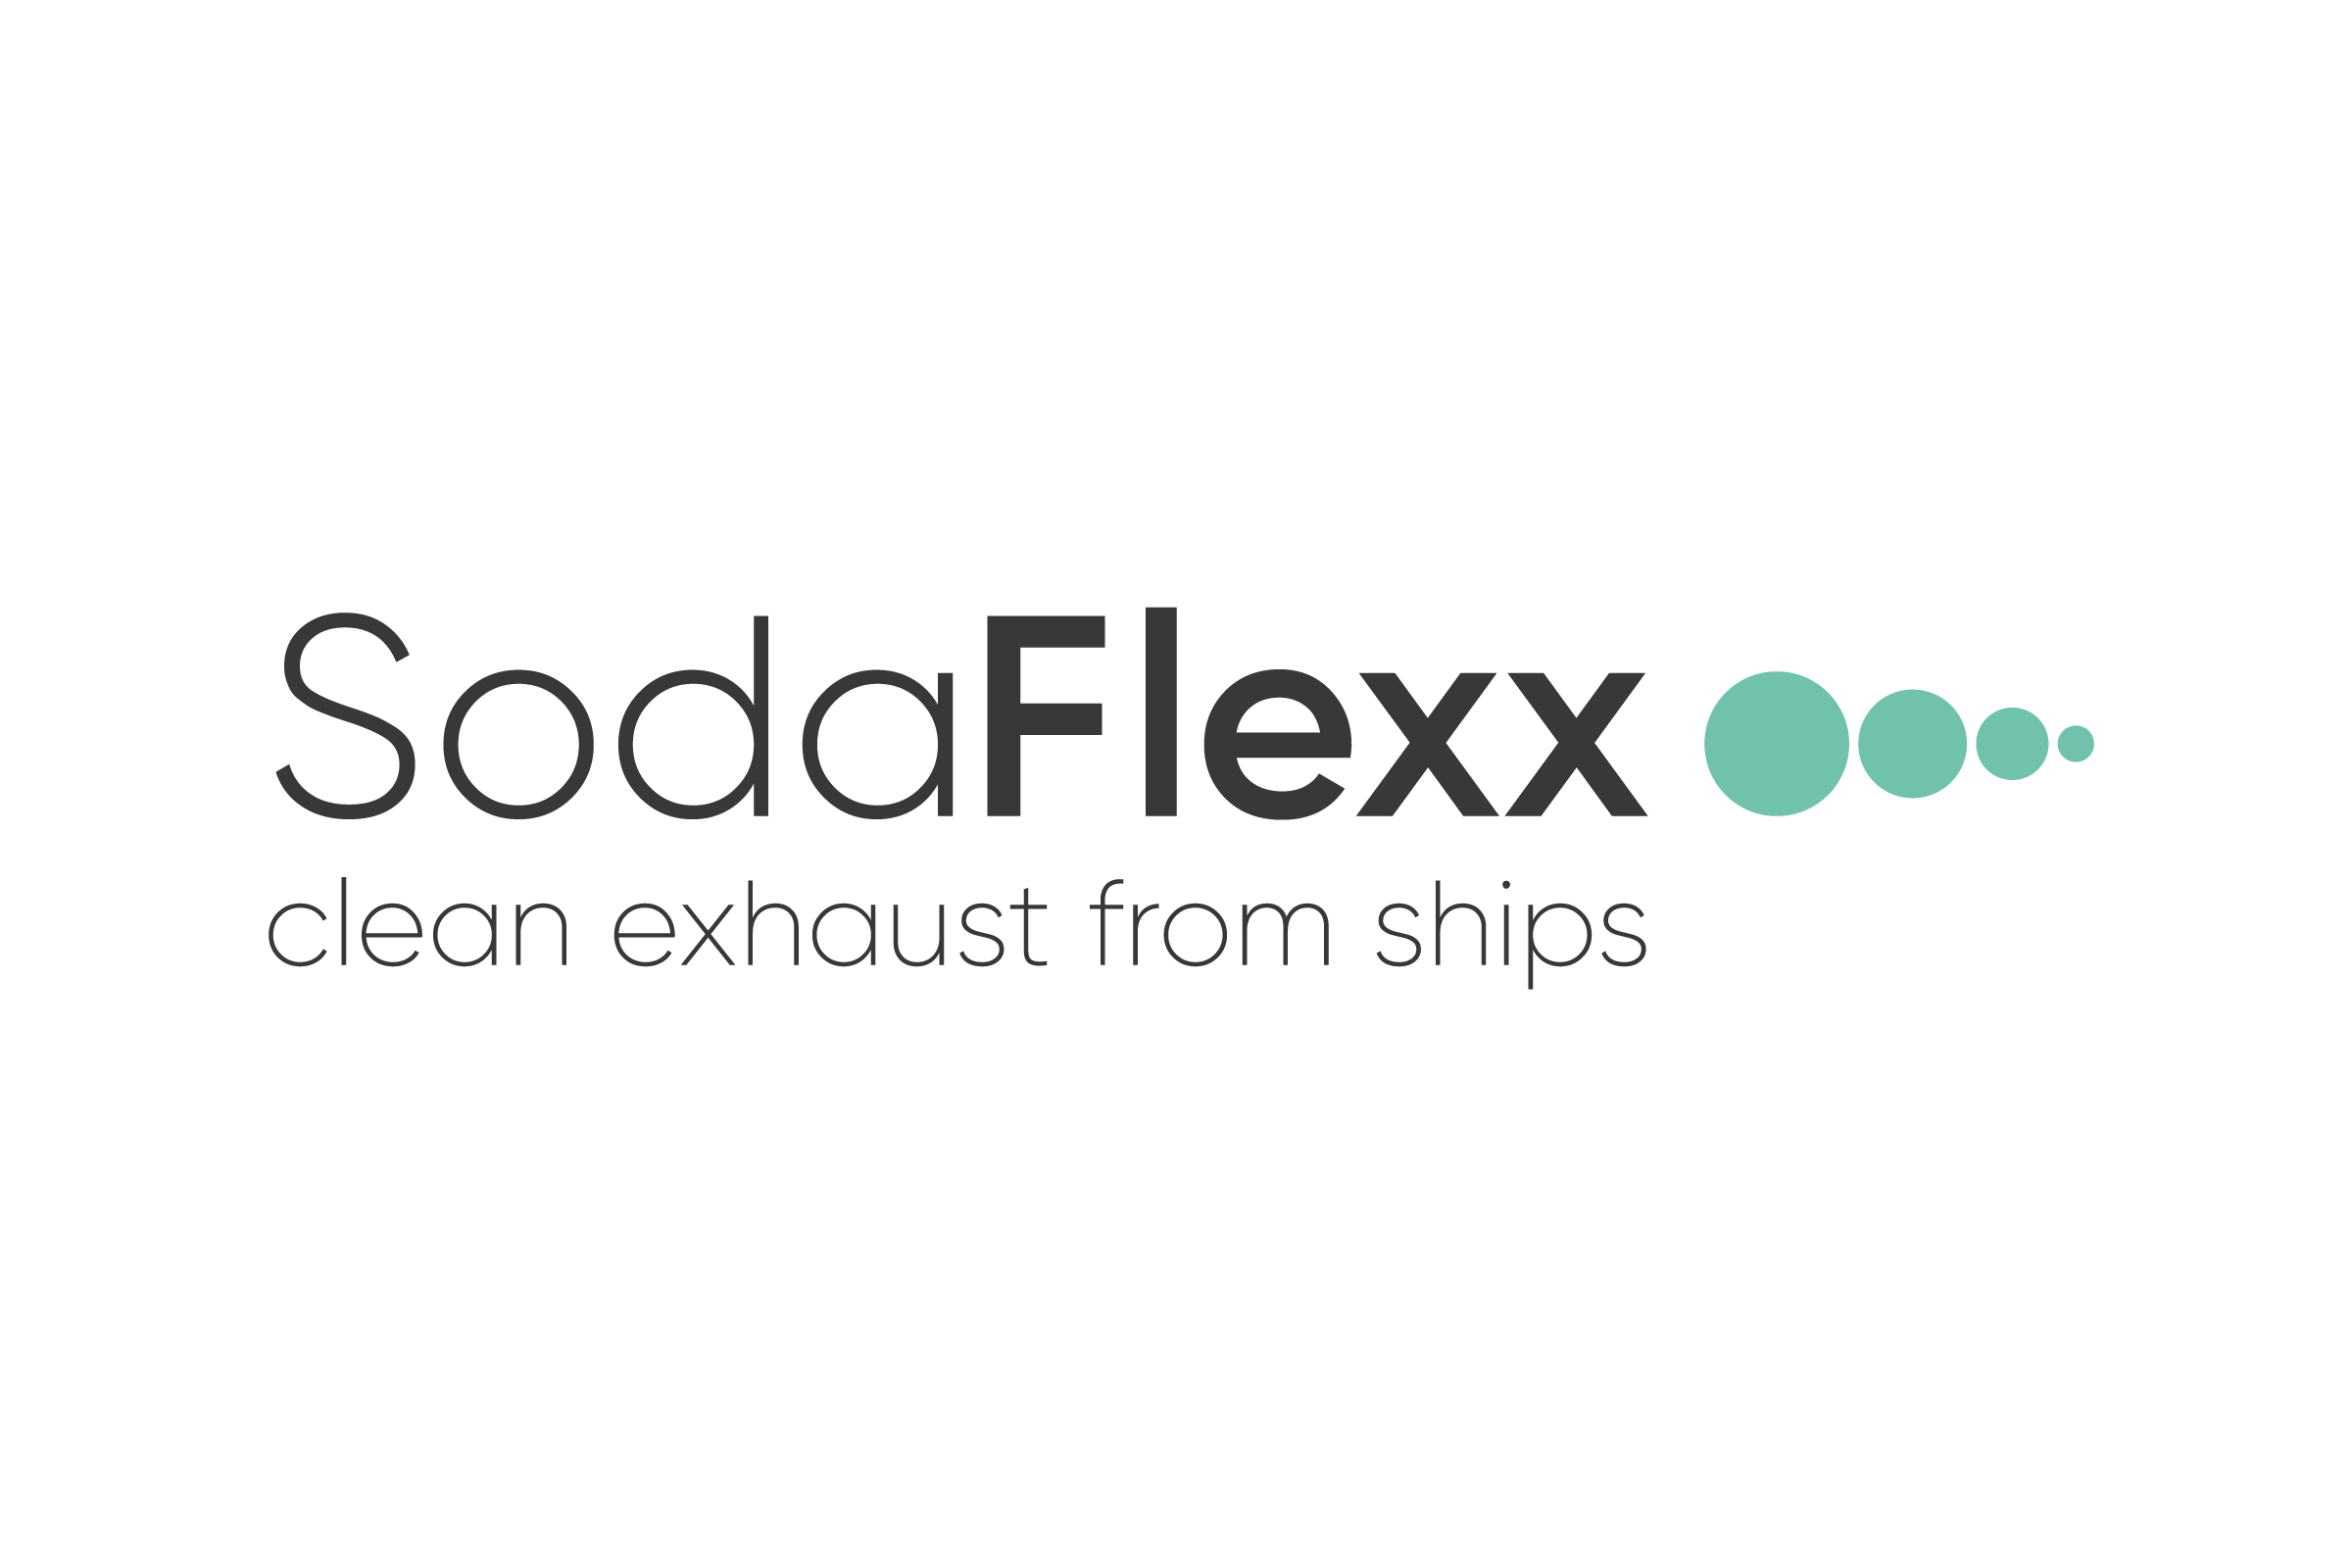 SodaFlexx unveils our new corporate identity